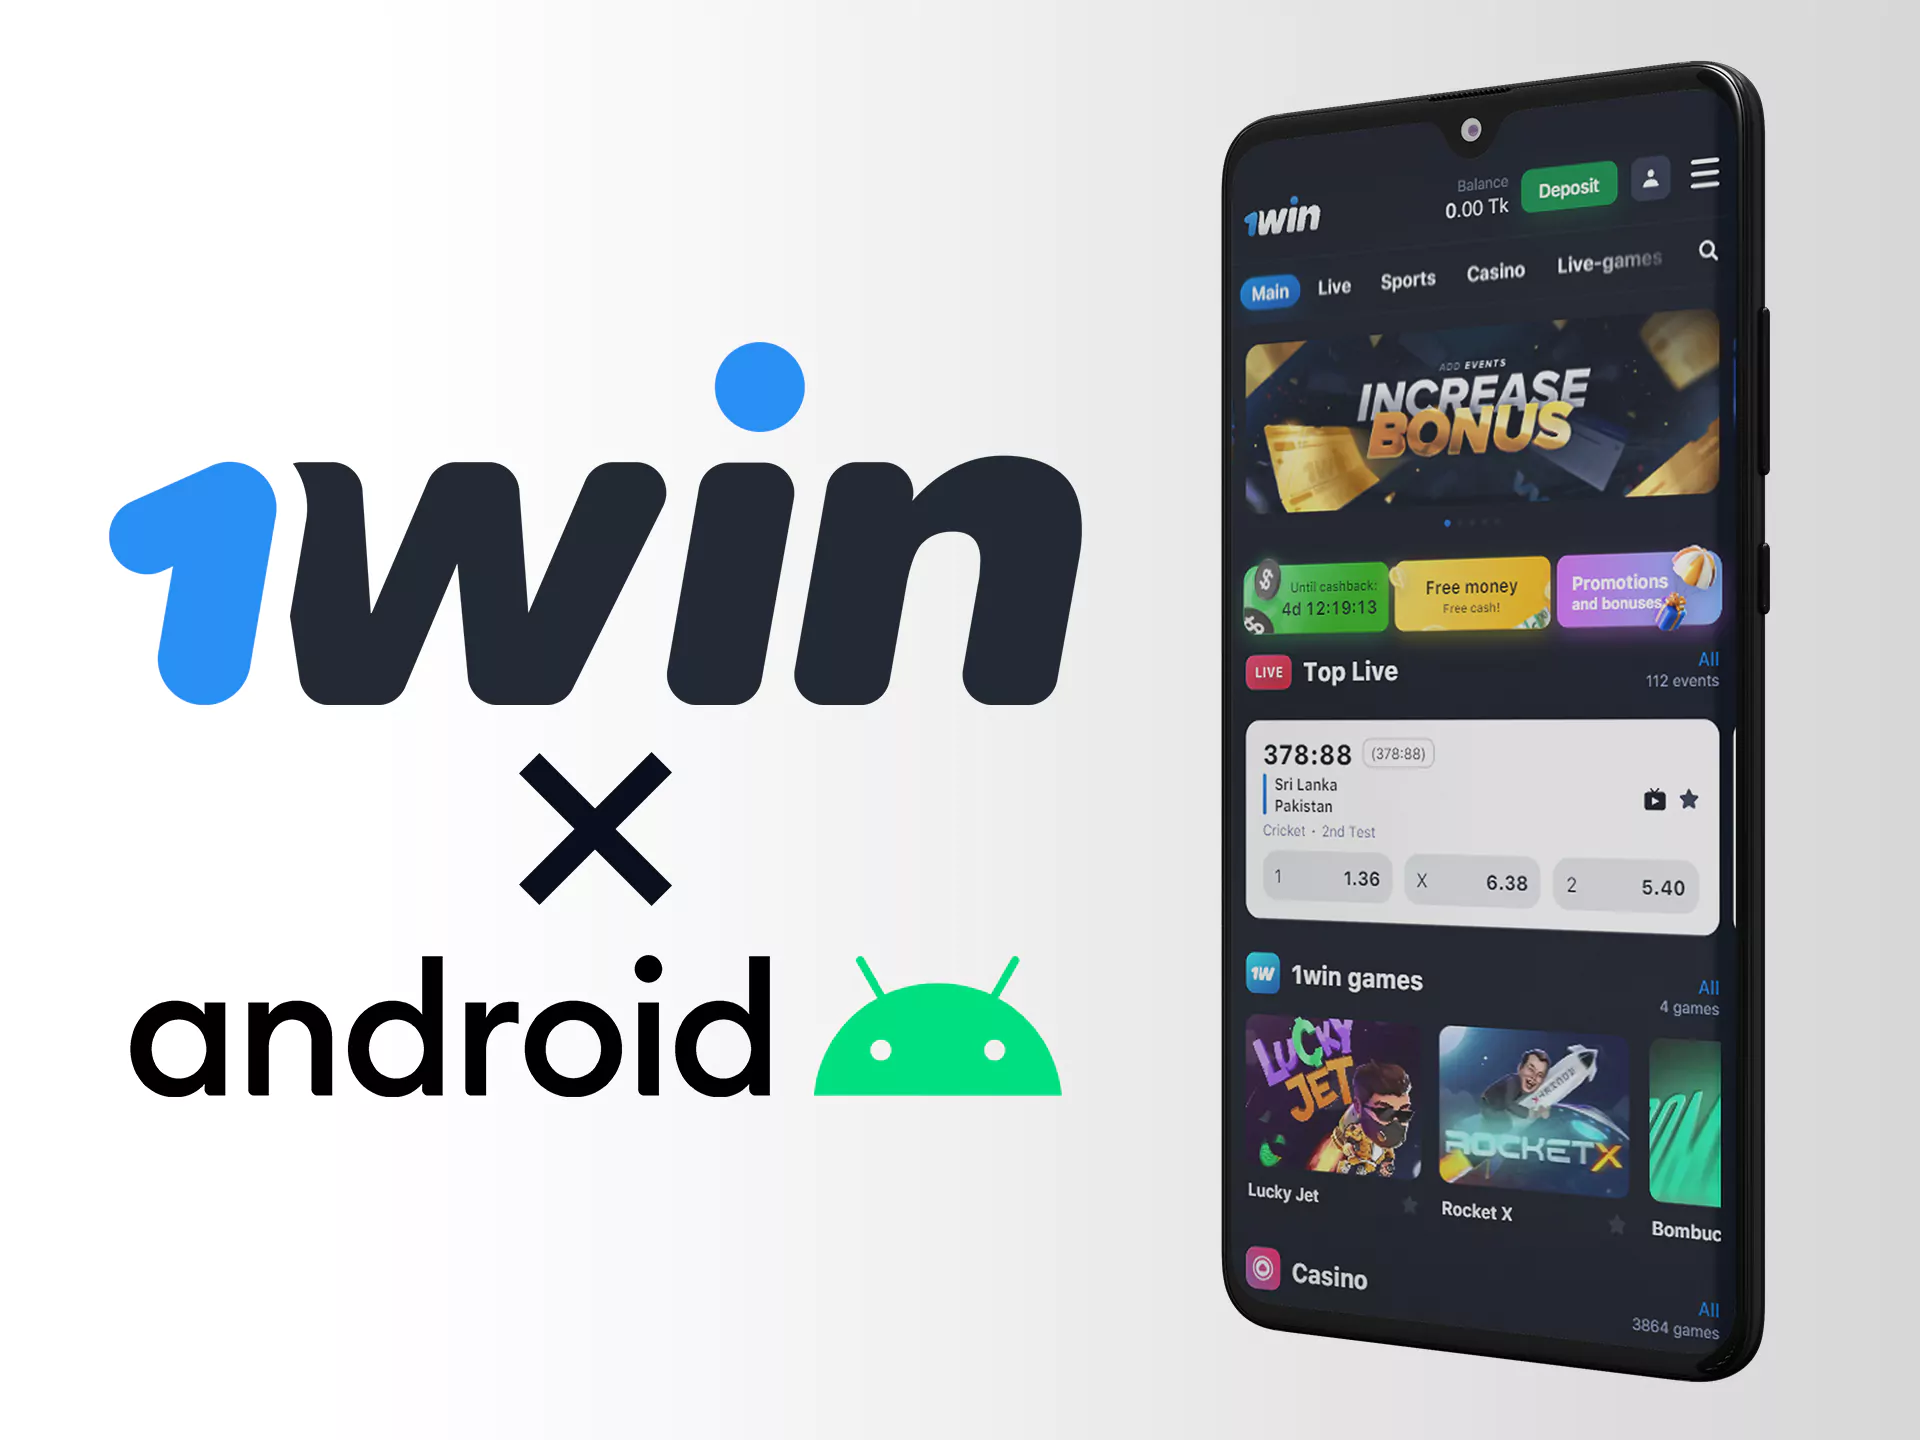 1win app supports many android devices.